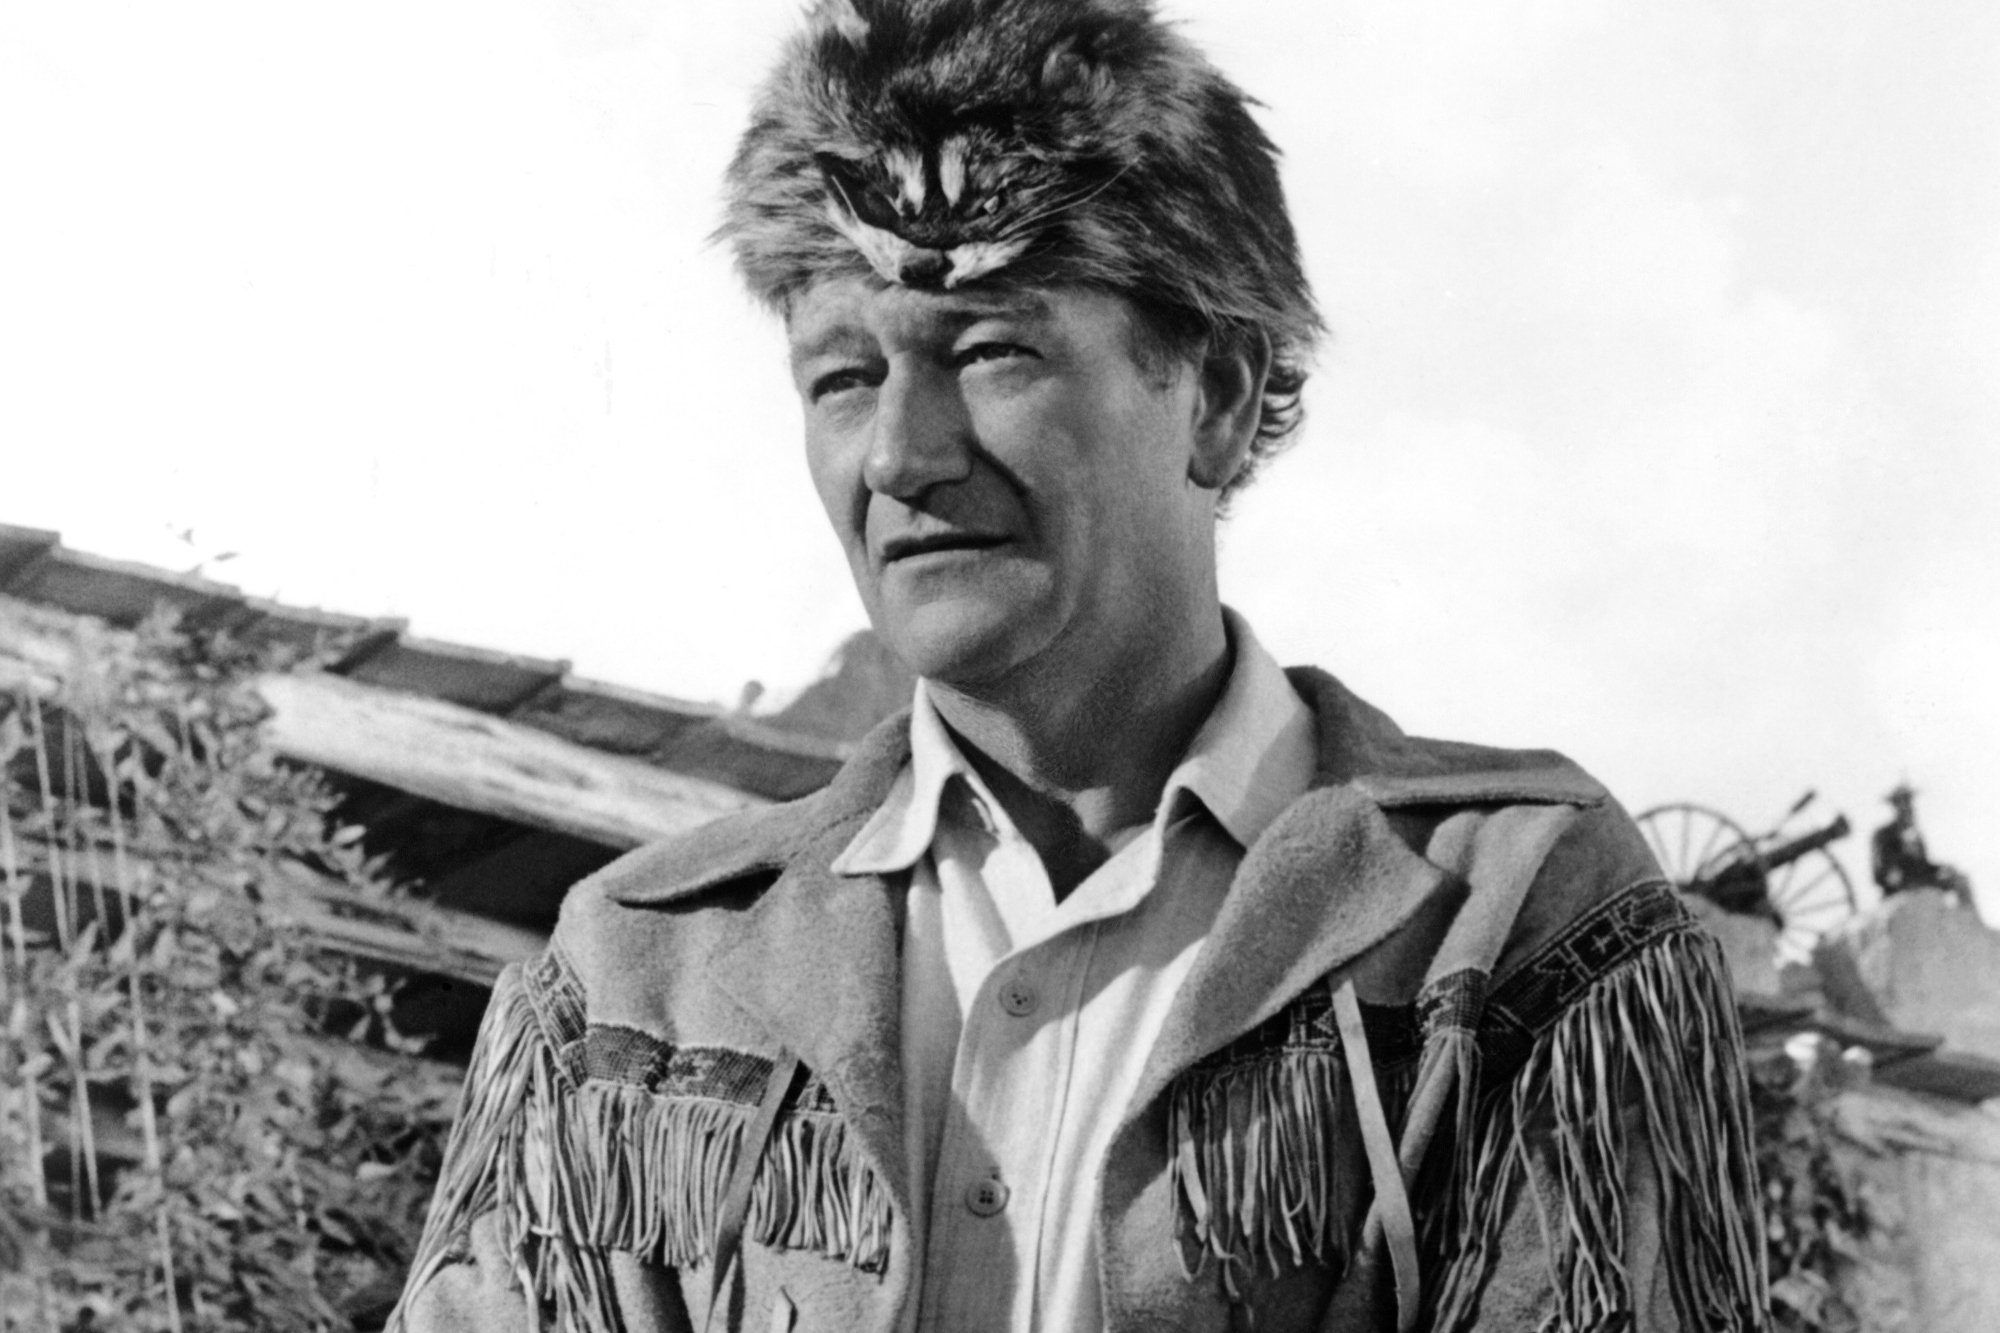 Hero movie star John Wayne in a black-and-white picture wearing a Western jacket with tassels.